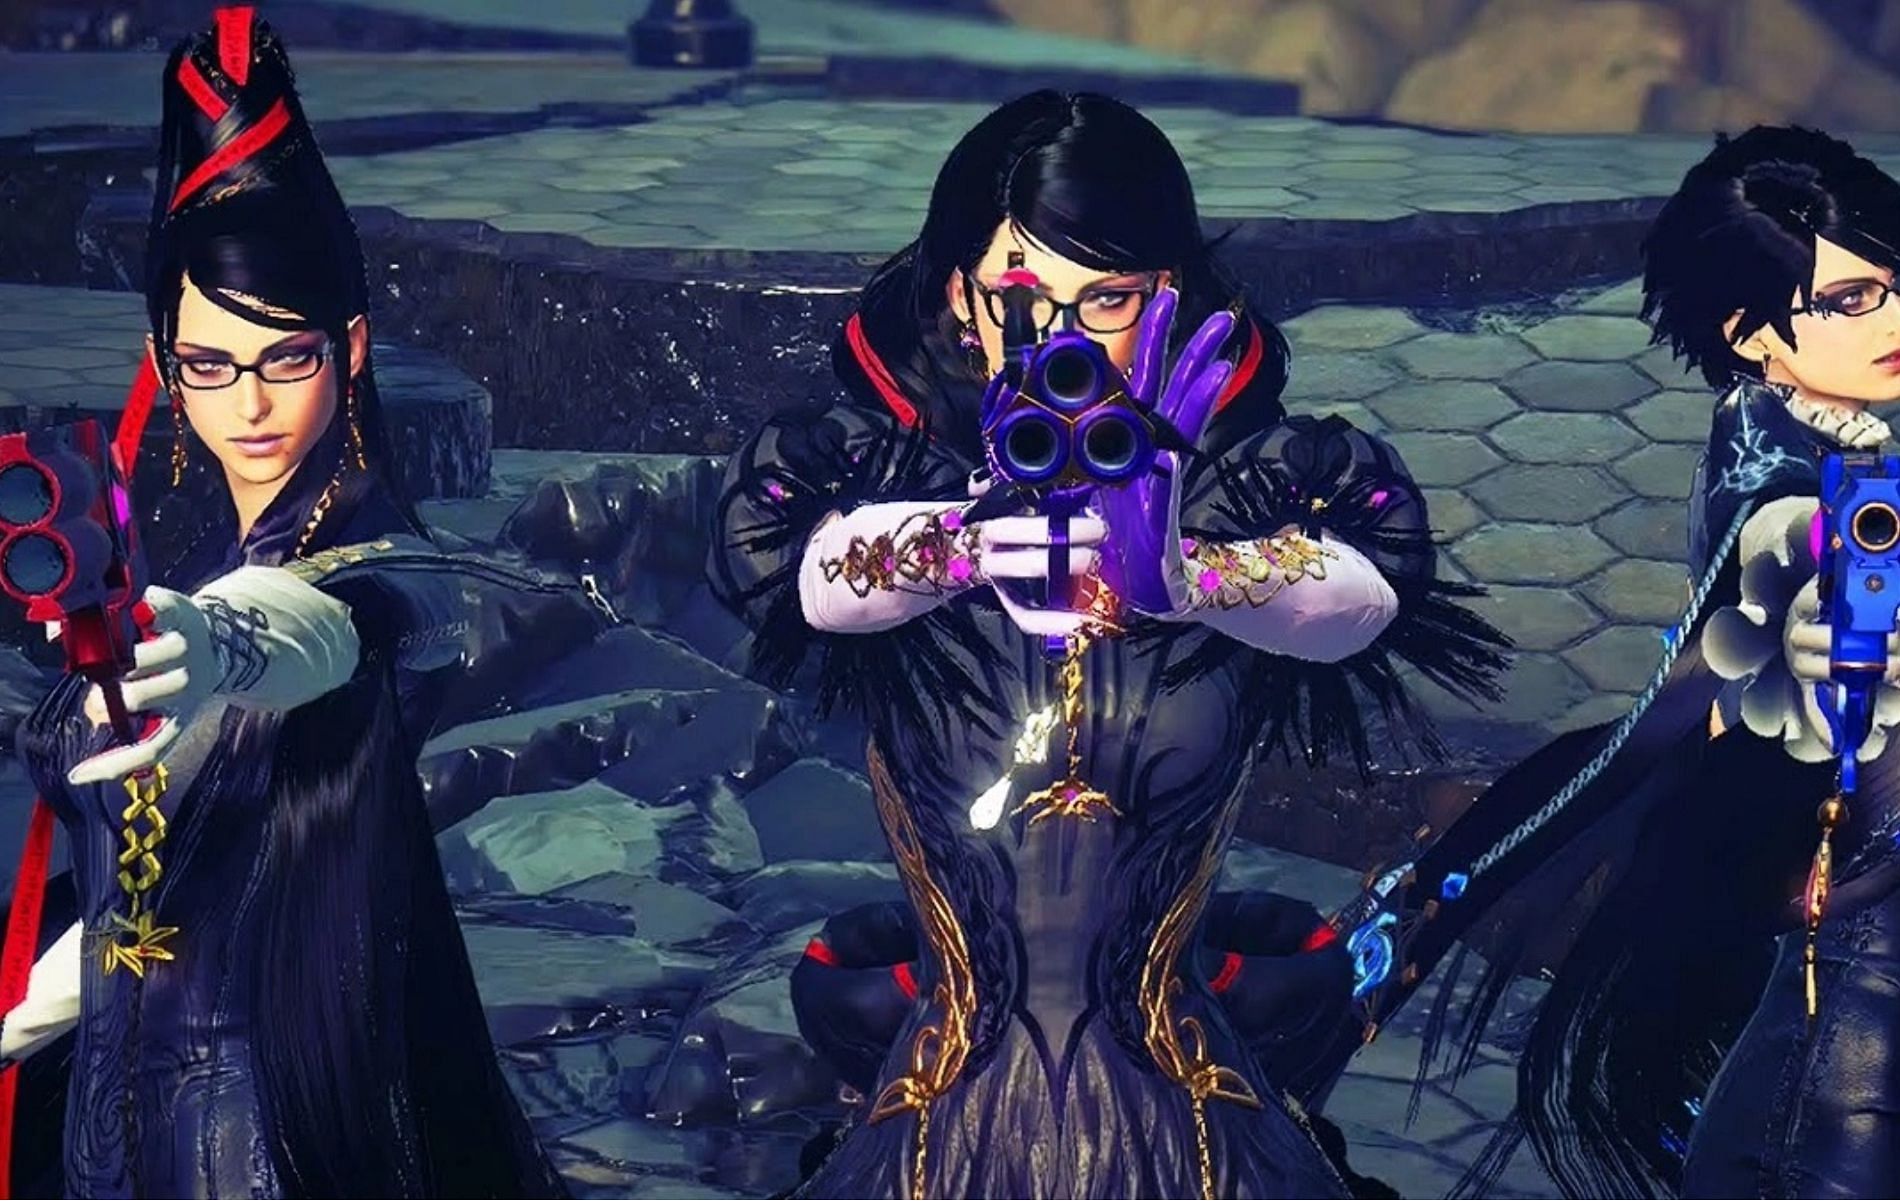 The full weaponry arsenal of Bayonetta the witch explained (Image via Platinum Games)